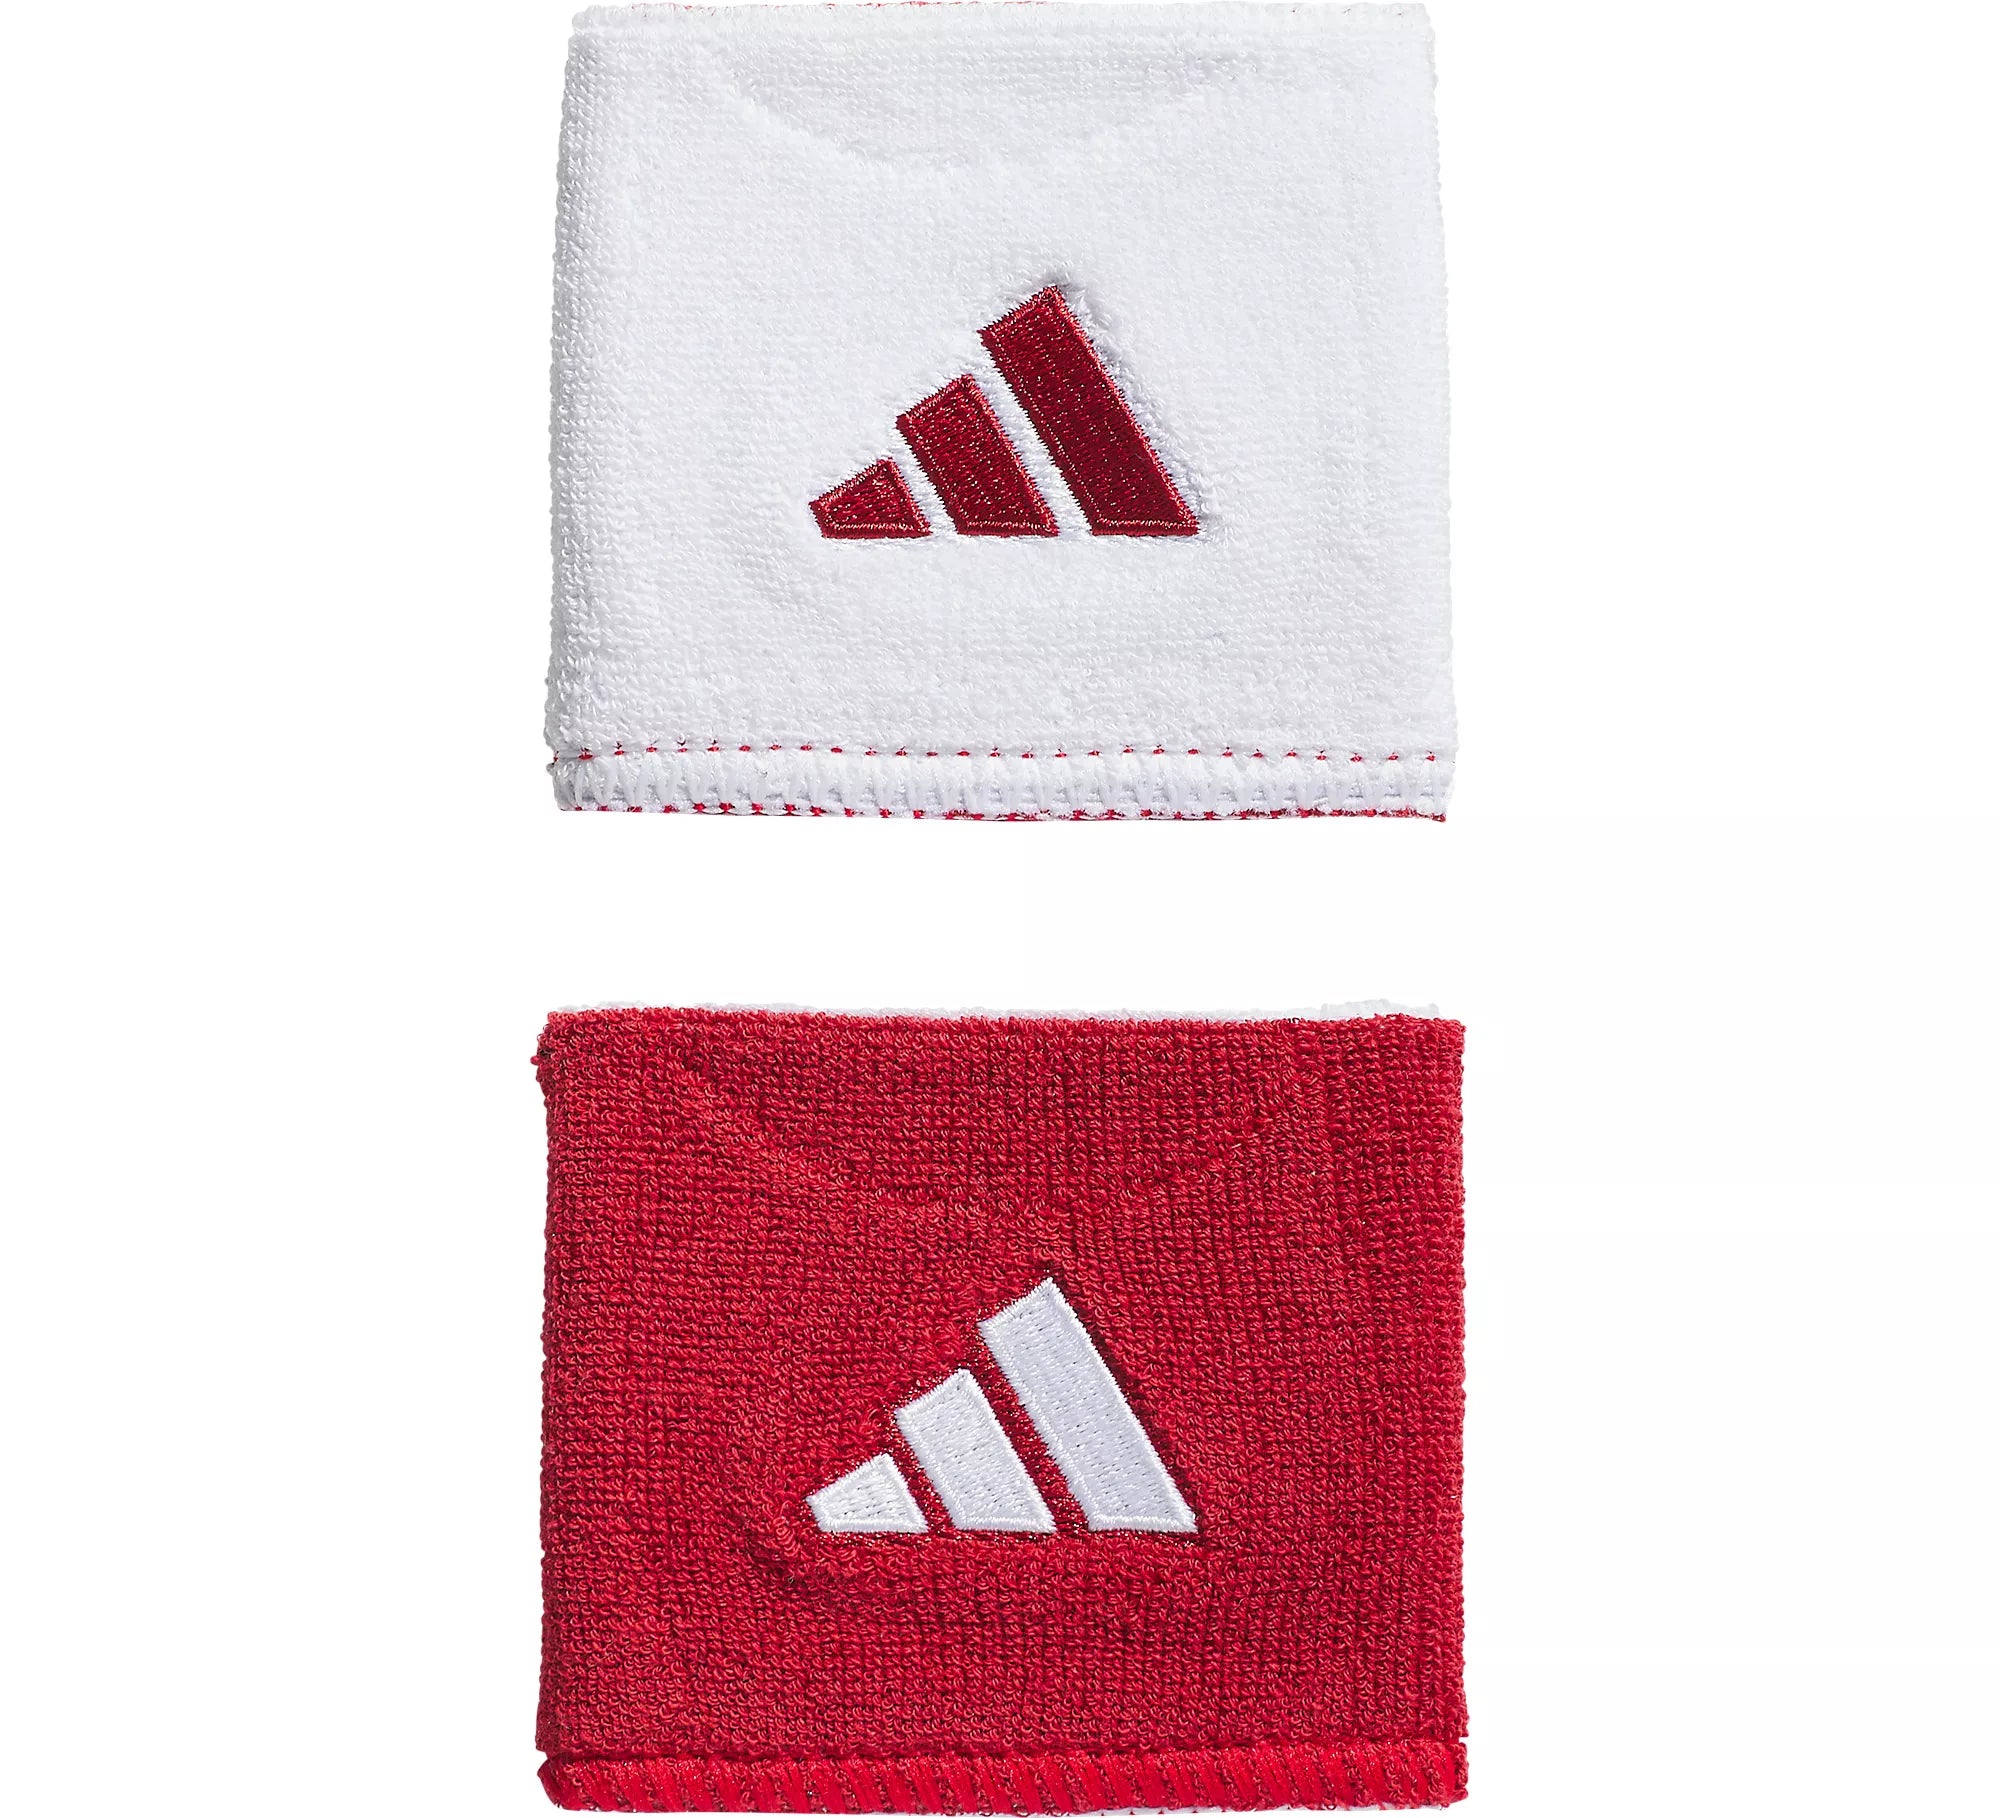 Adidas Interval Reversible 2.0 Wristband - Red/White